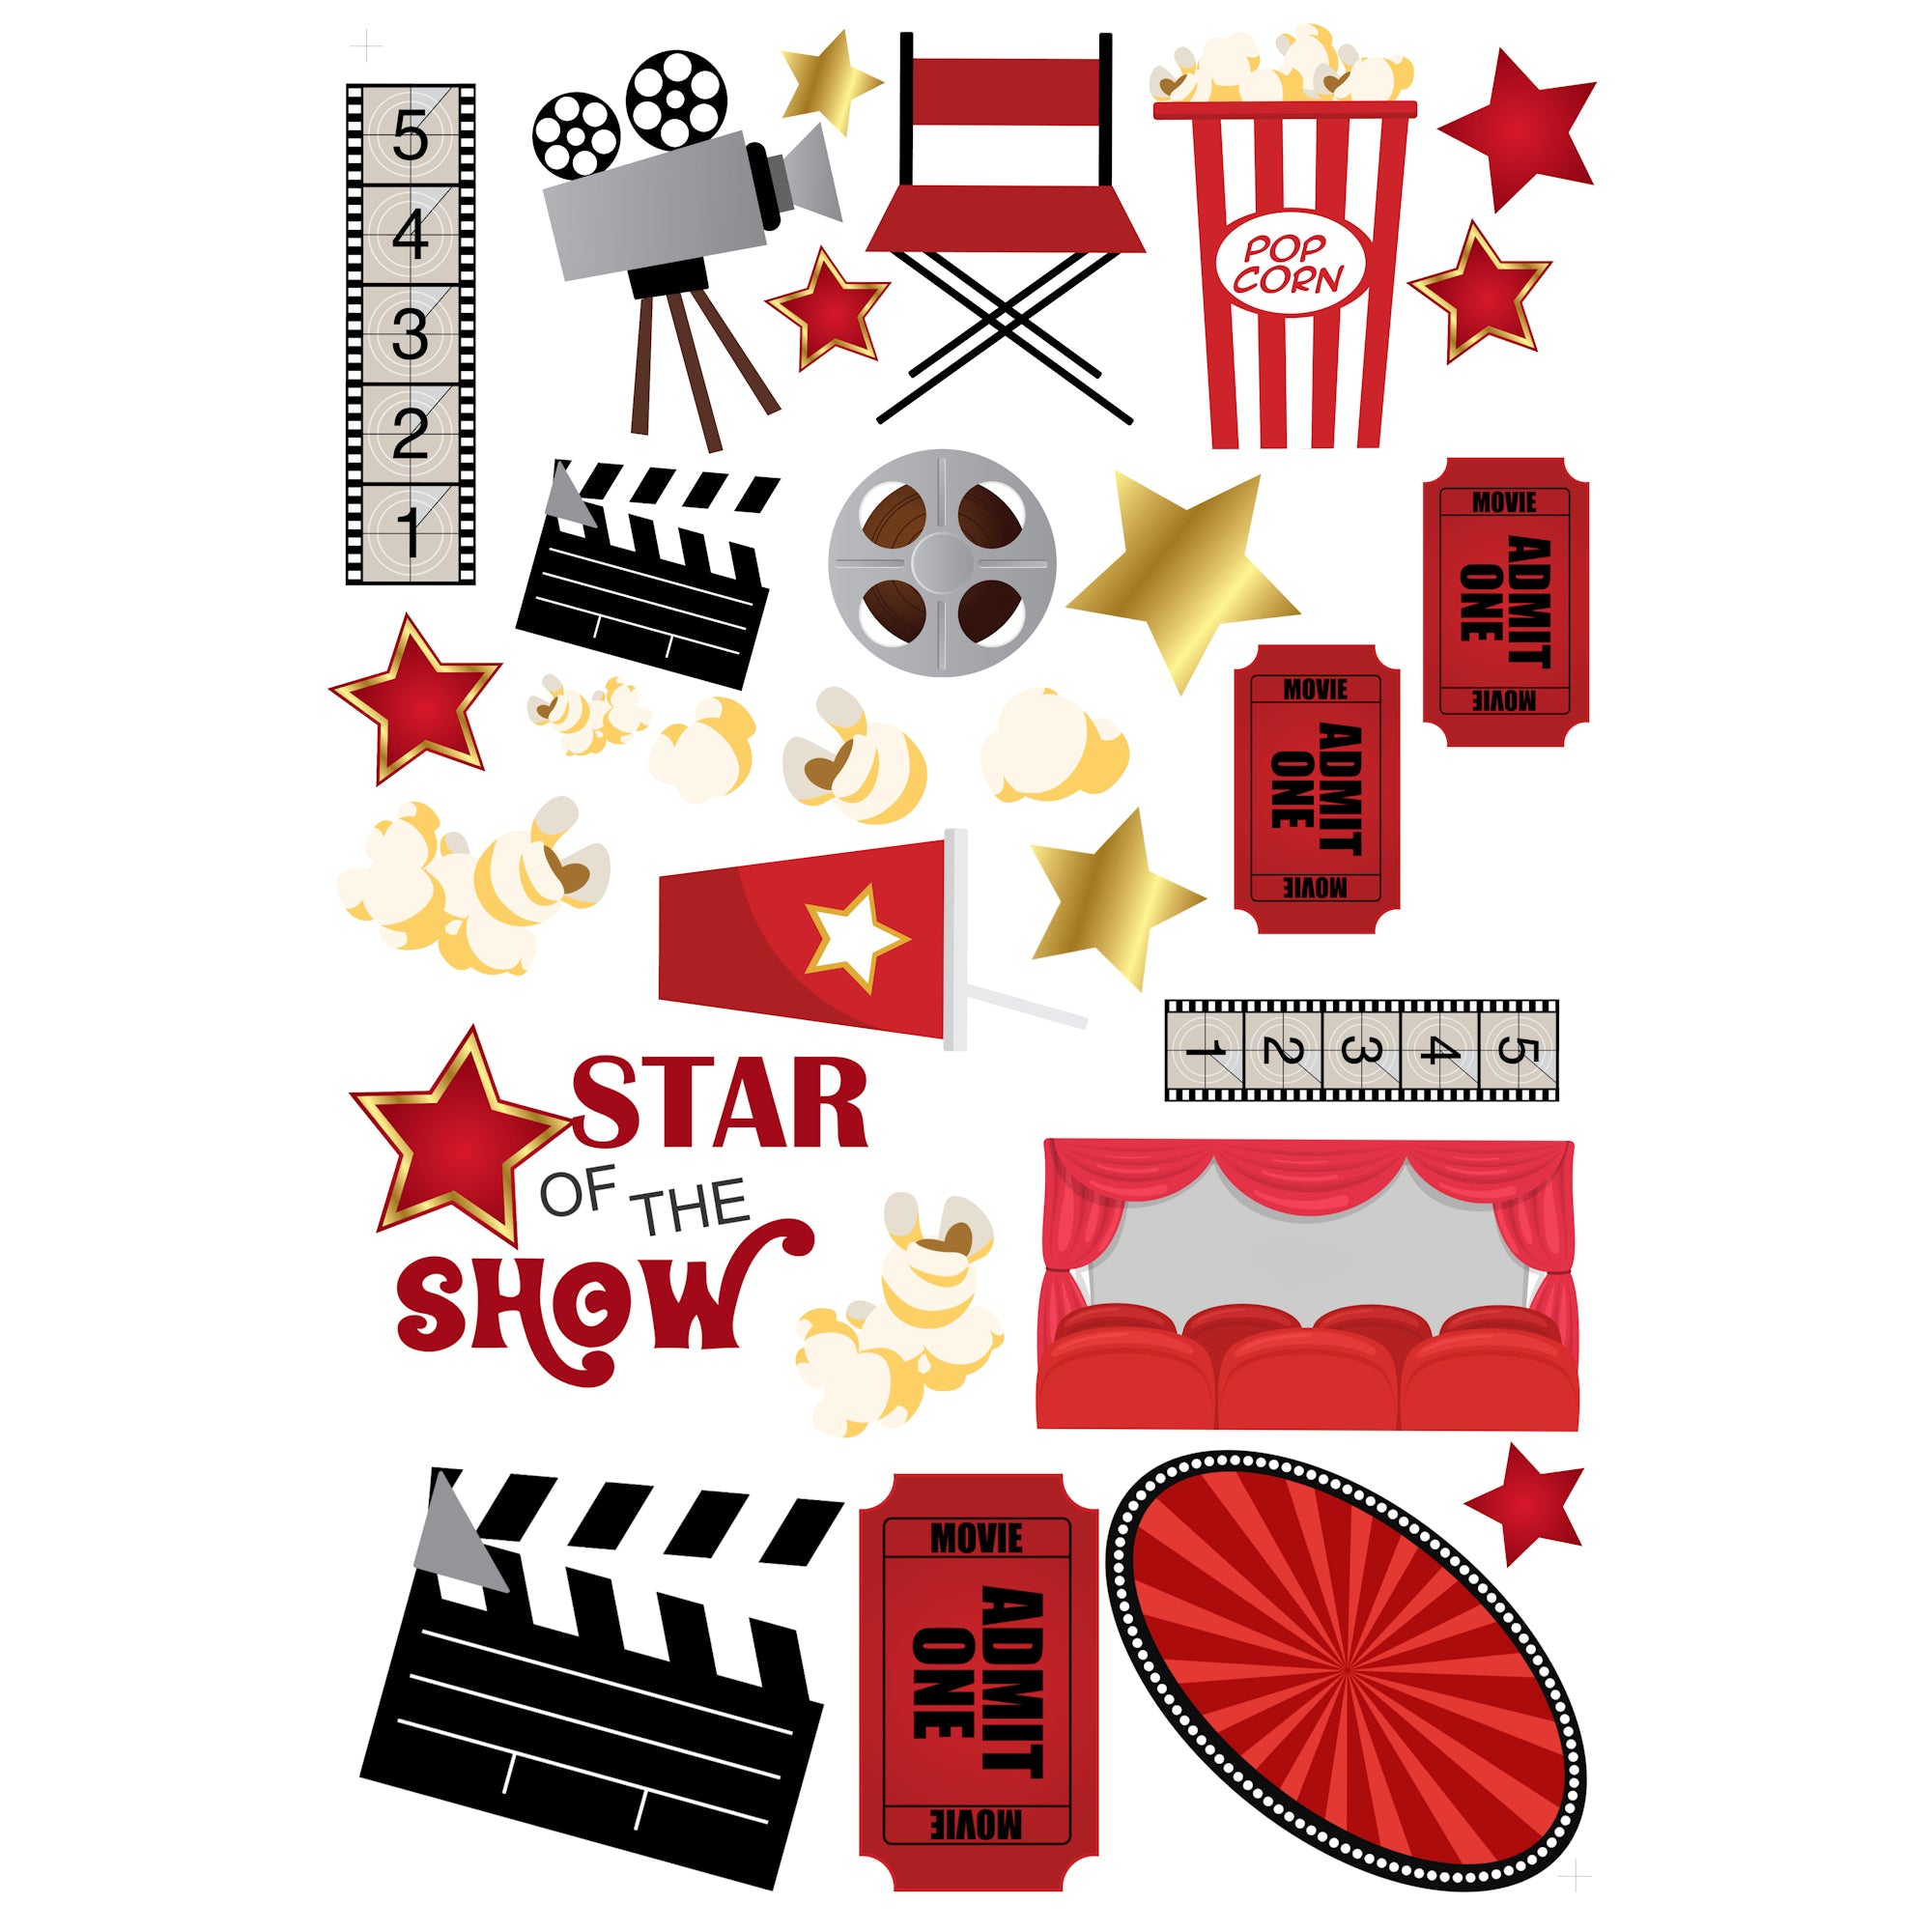 Movie Time 12 x 12 Scrapbook Paper & Embellishment Kit by SSC Designs